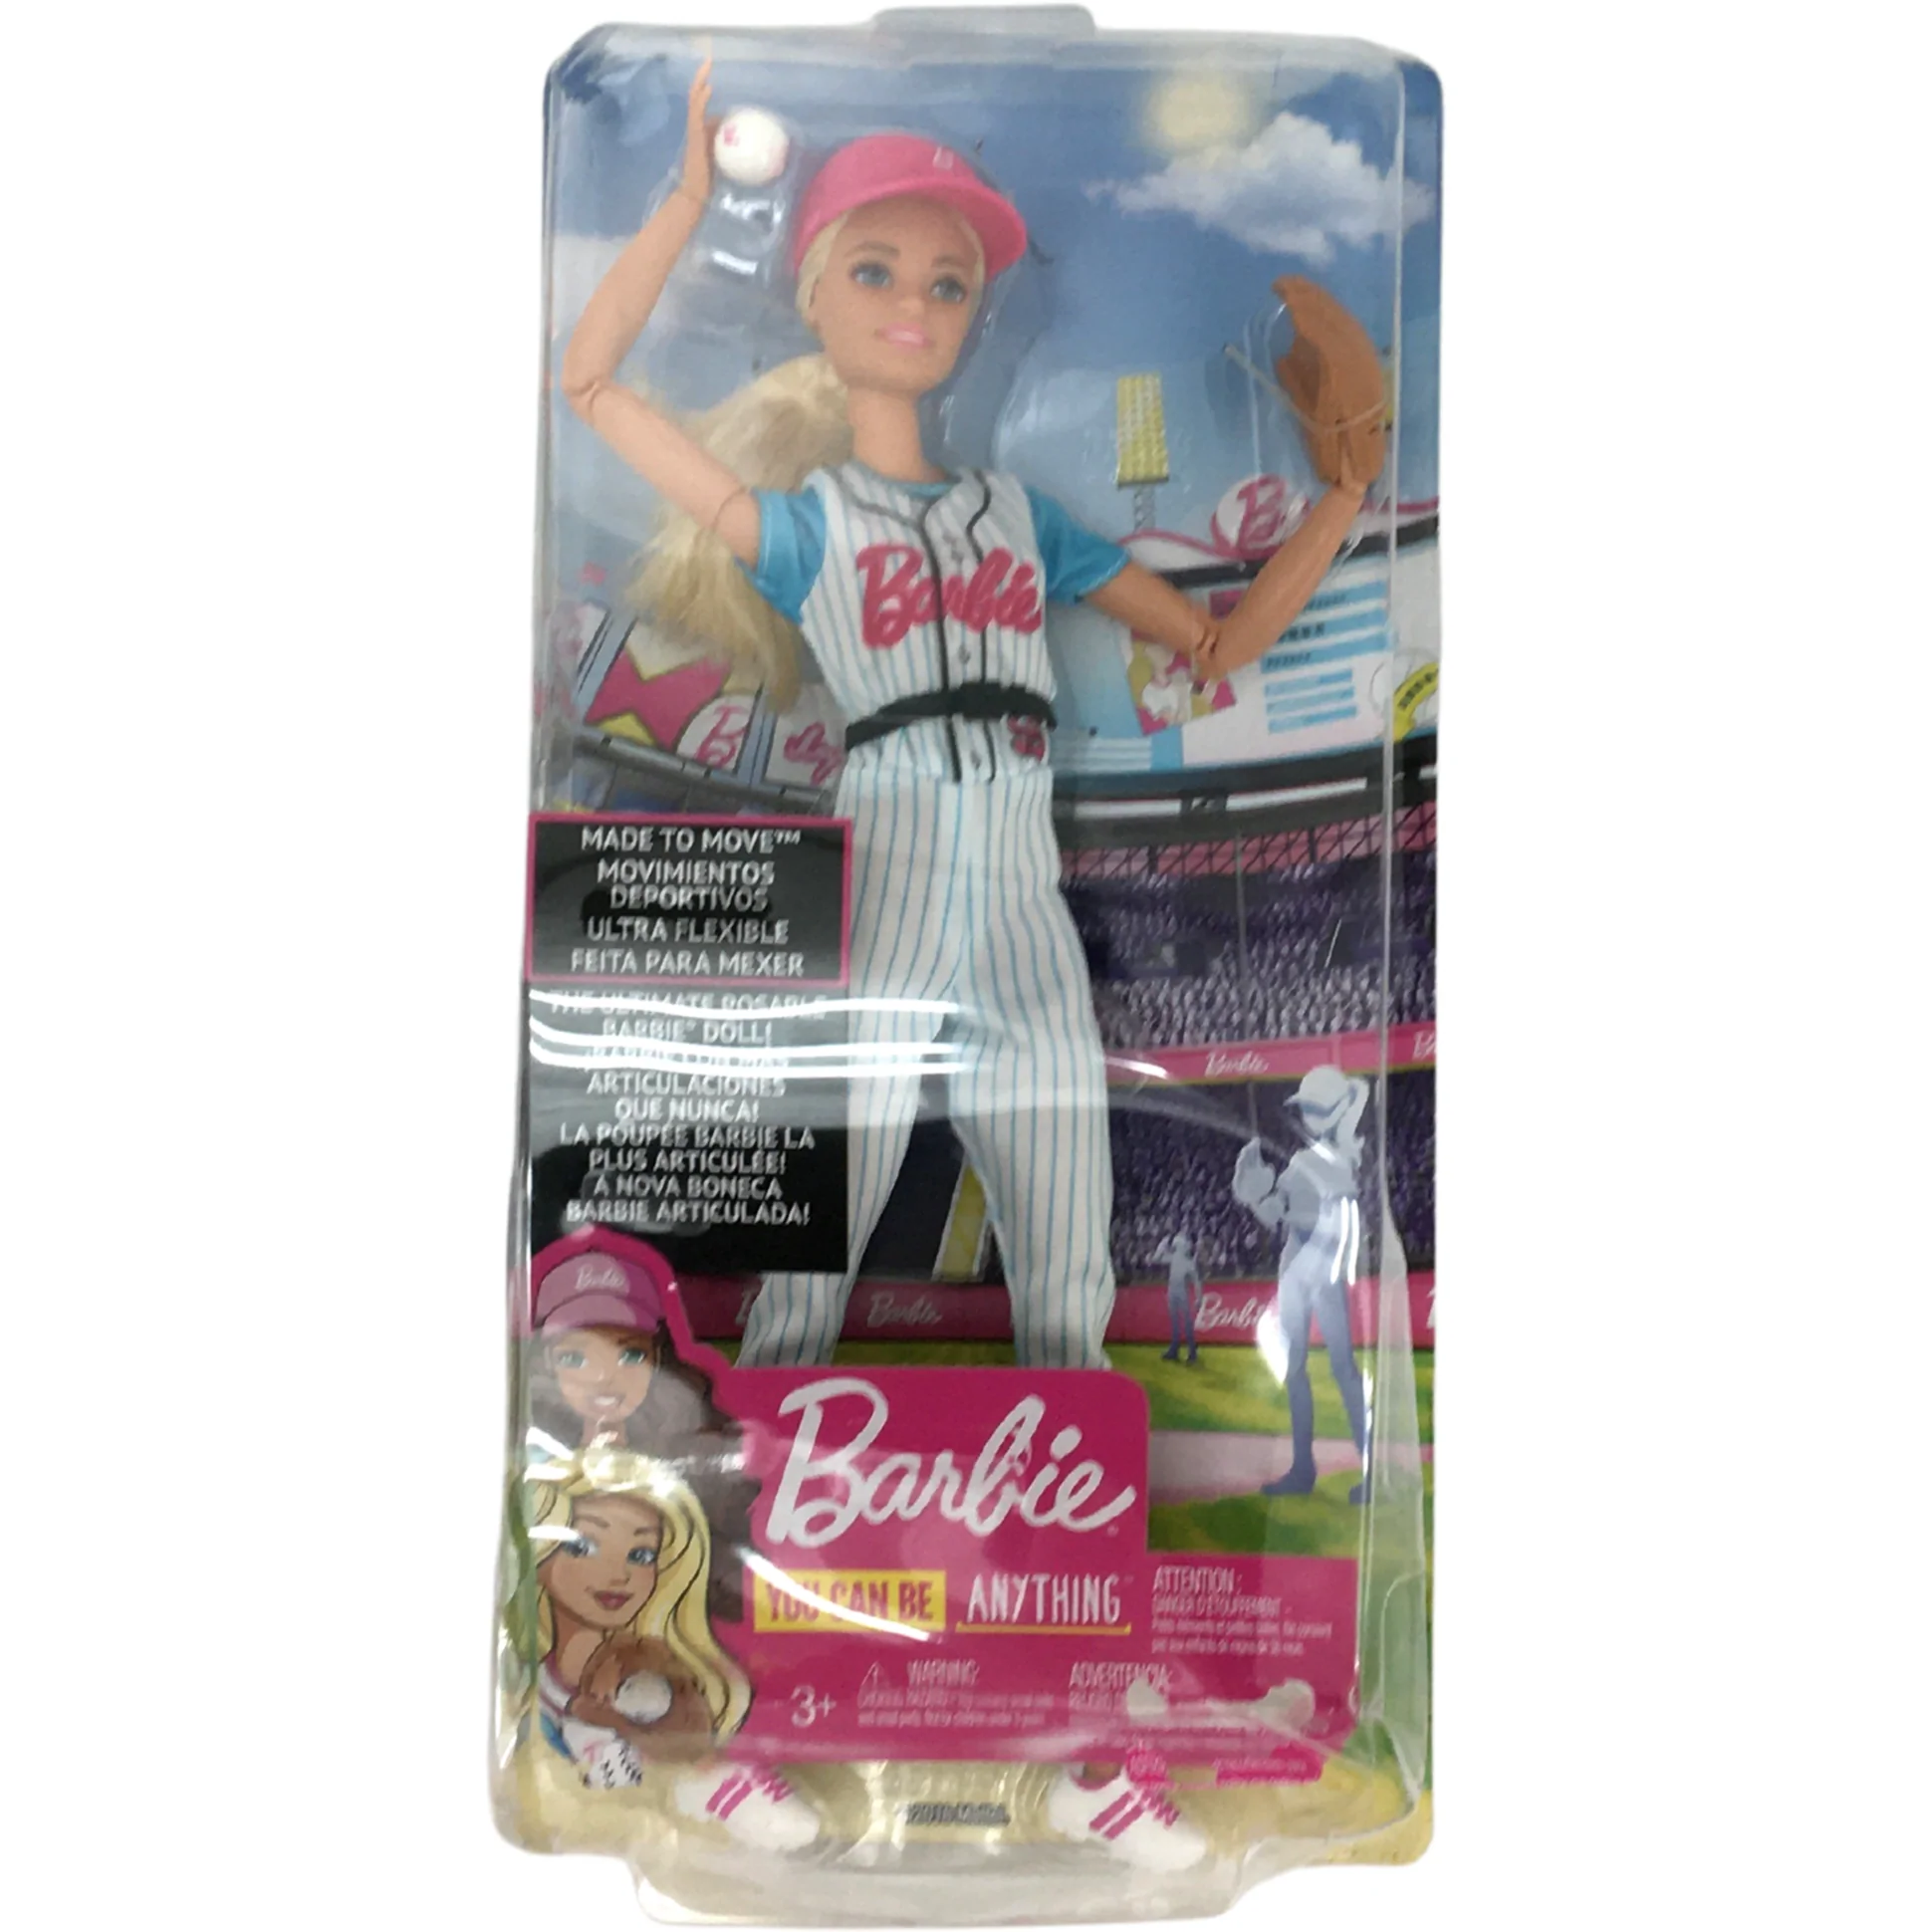 Barbie/ You Can Be Anything: Baseball Player/ Made to Move/ Age 3+